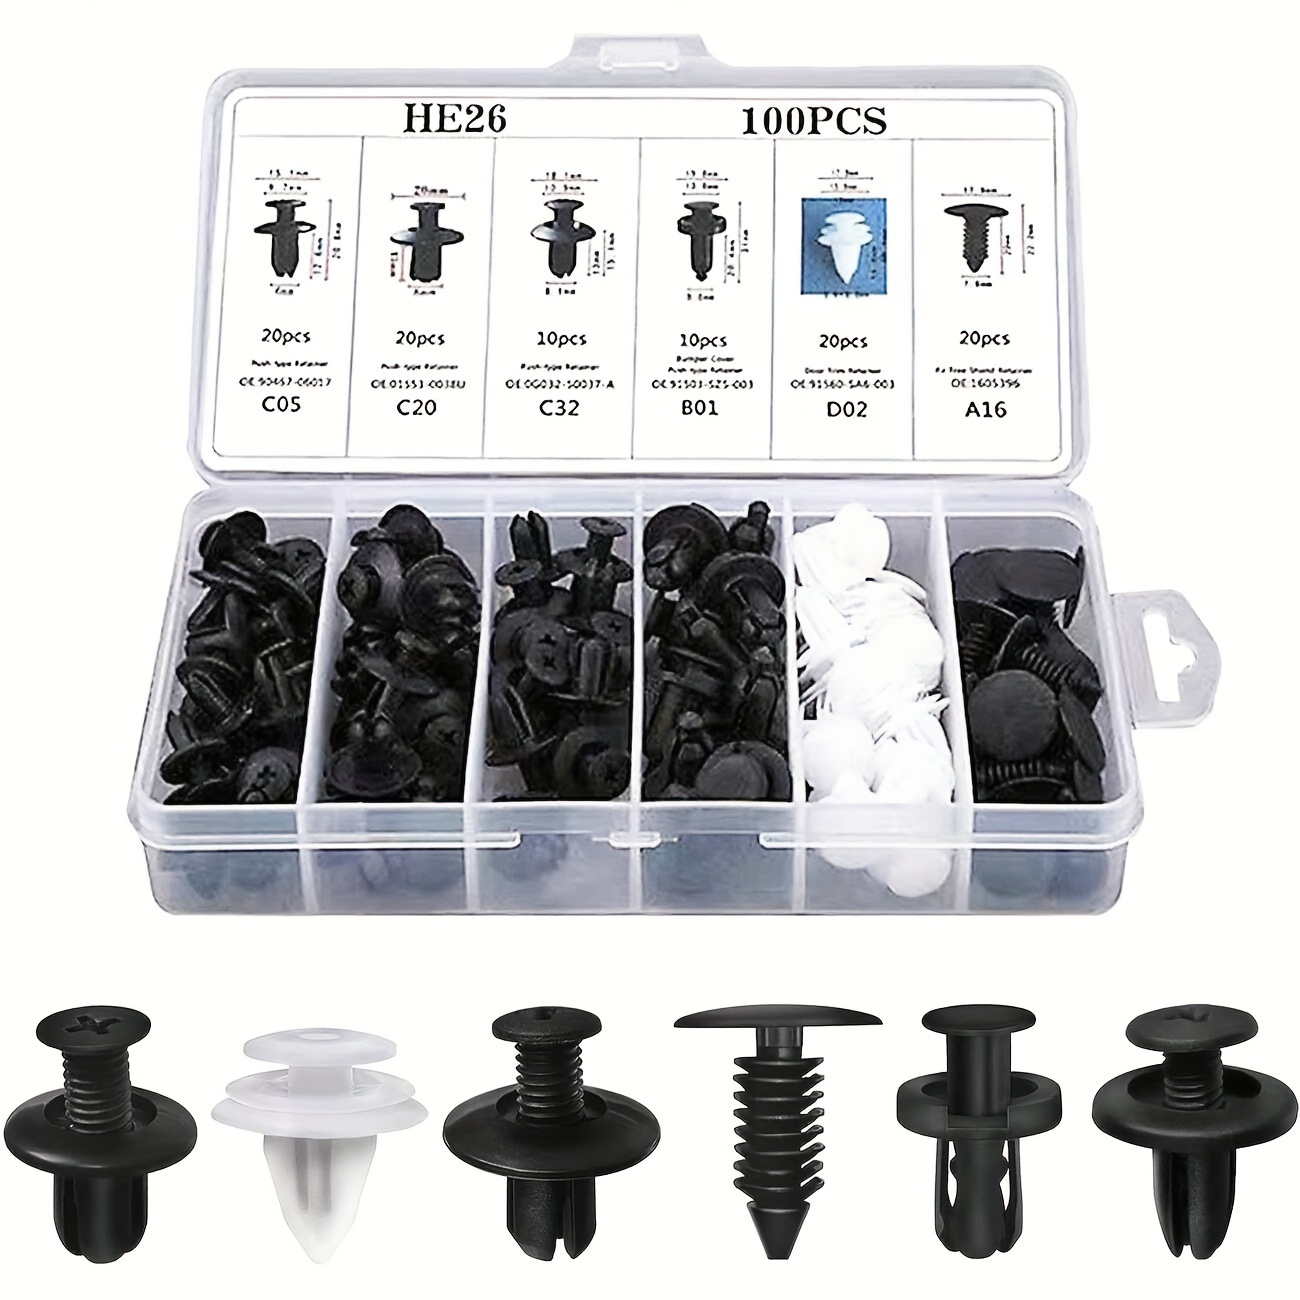 

100pcs Bumper Retainer Clips Car Plastic Rivets Fasteners Auto Push Pin Set, Automotive Body Door Trim Panel Fender Clips Kit For Trucks And Motorcycles